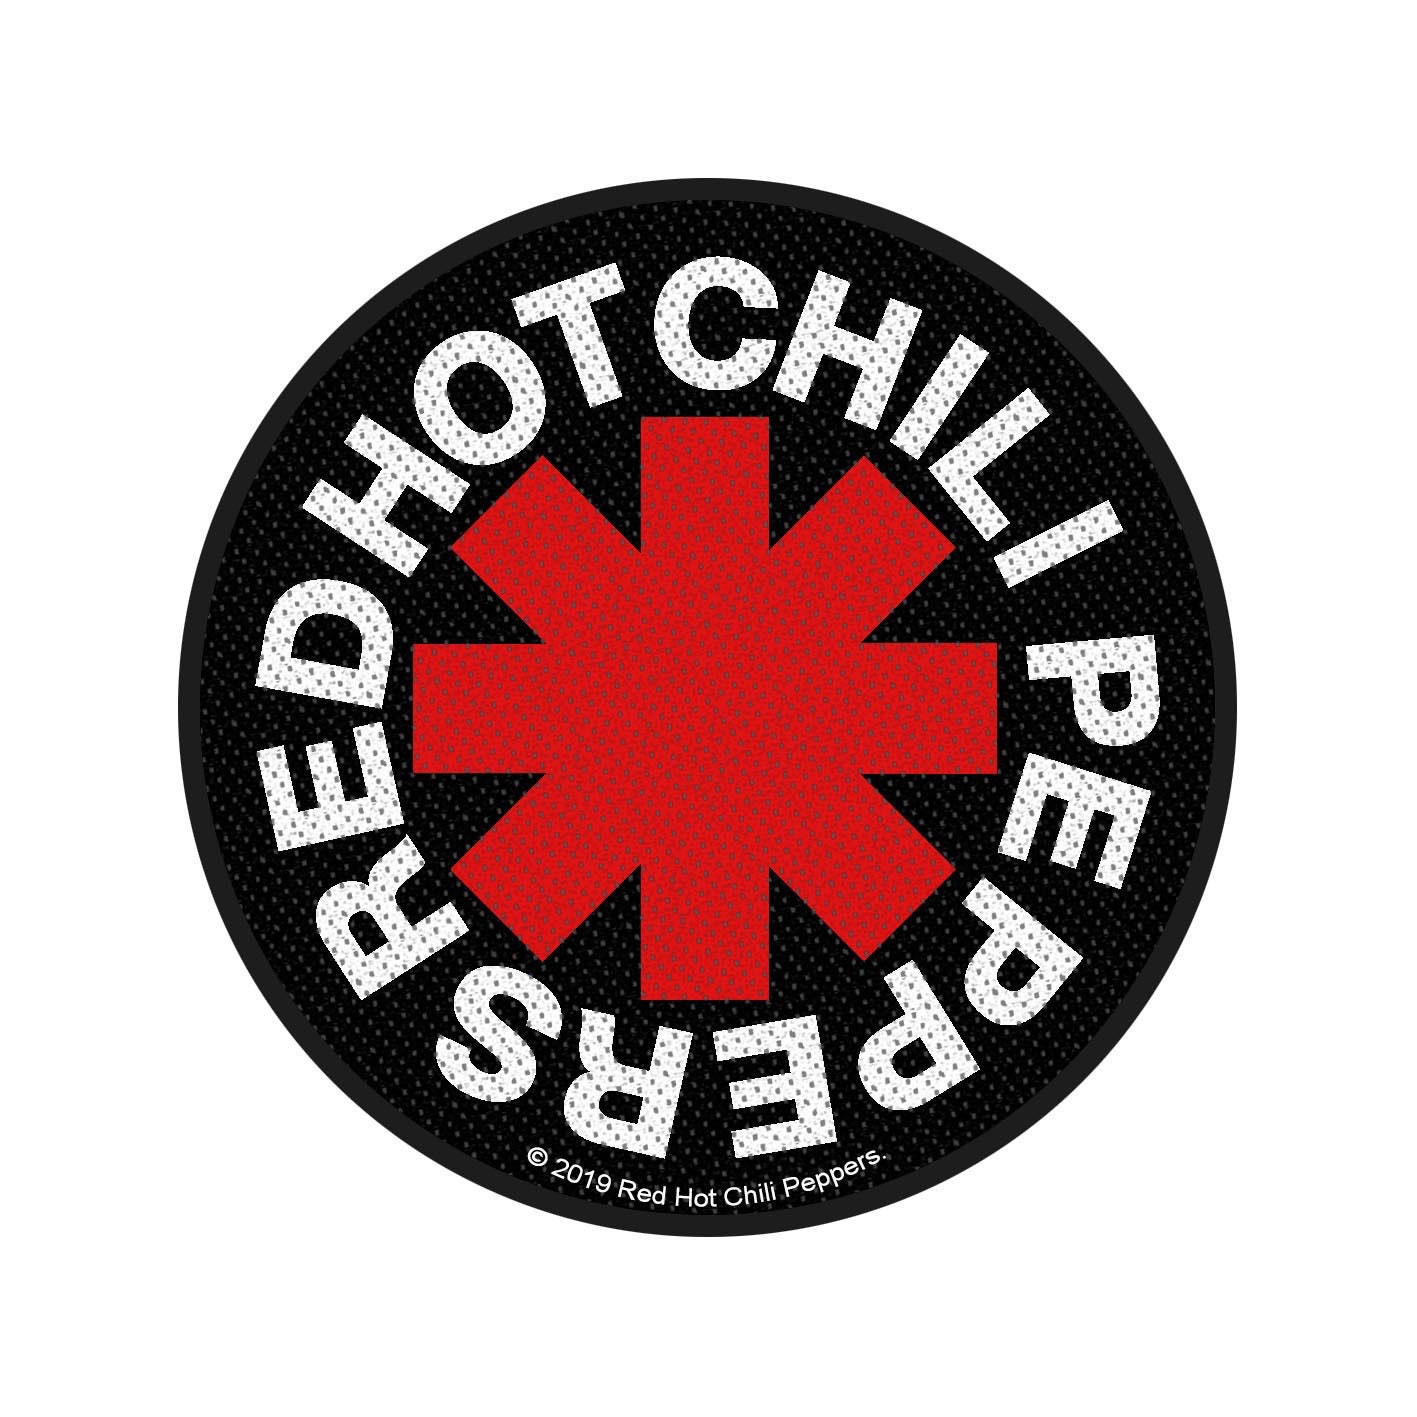 RHCP Enamel Pin Set – Red Hot Chili Peppers